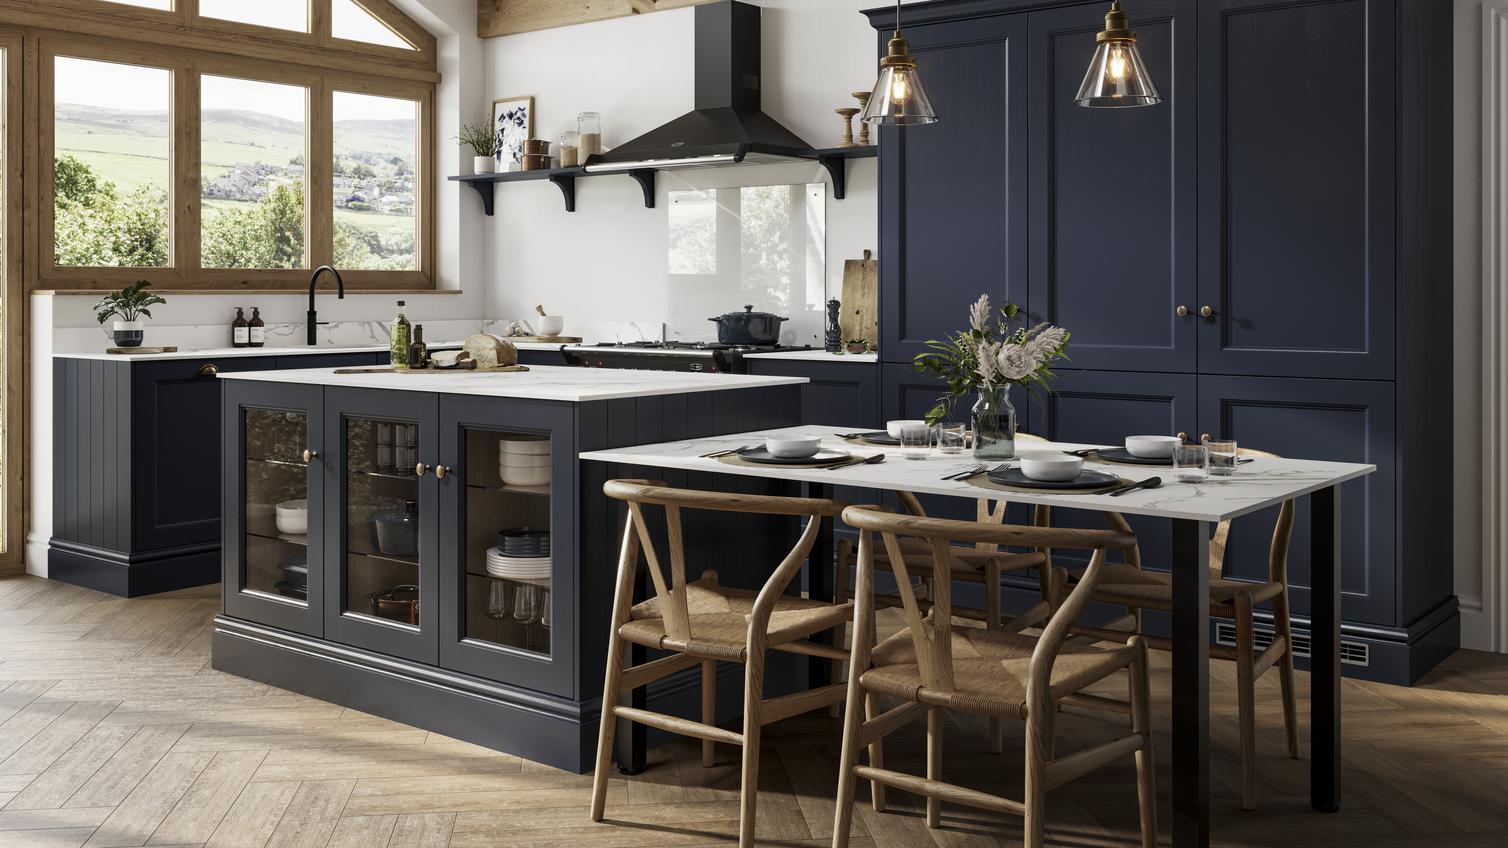 Navy shaker doors with a beaded detail in an island layout. Includes a black extractor, white worktops, and tower units.